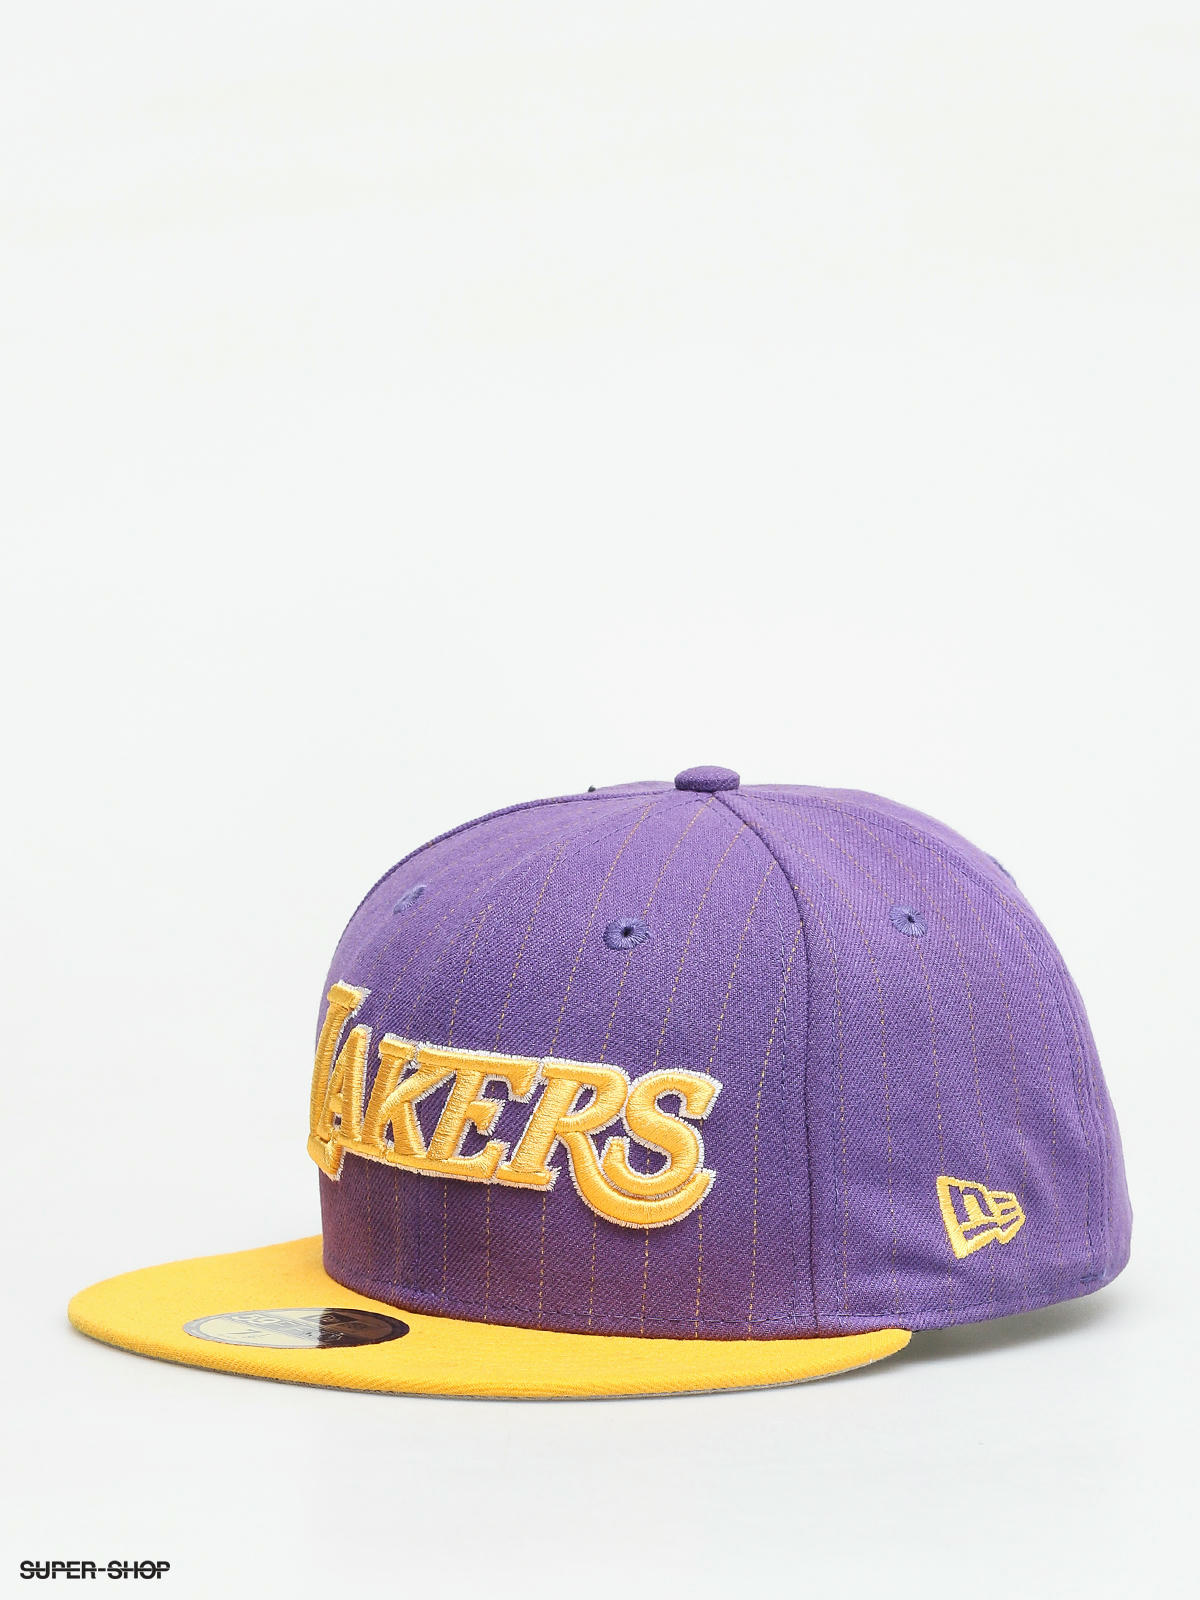 Los Angeles LAKERS NBA White 309 Mitchell & Ness Cap